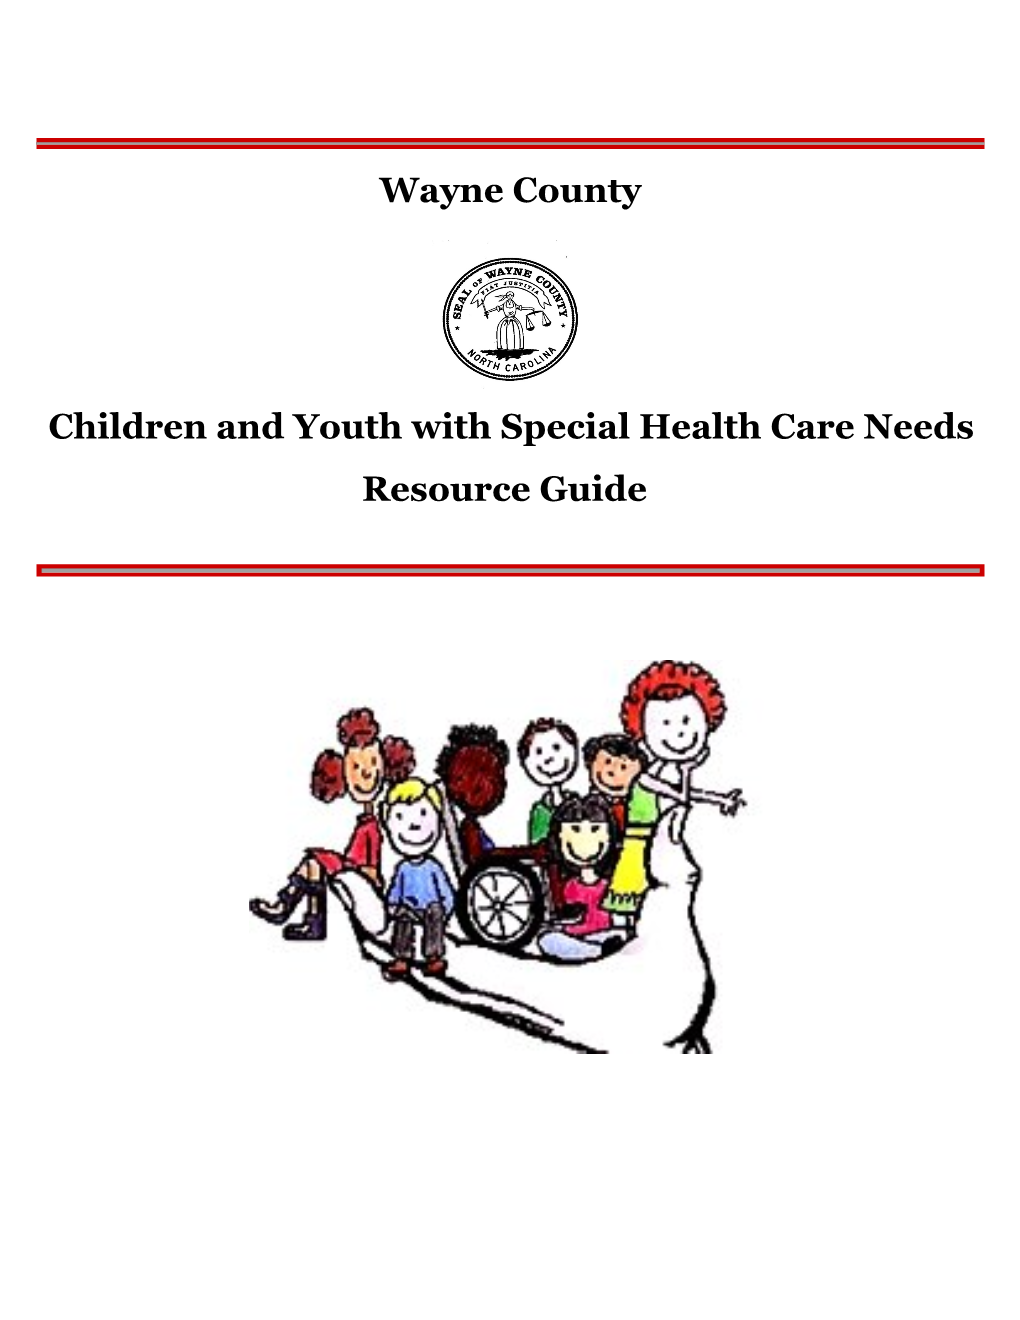 Children and Youth with Special Health Care Needs (PDF)